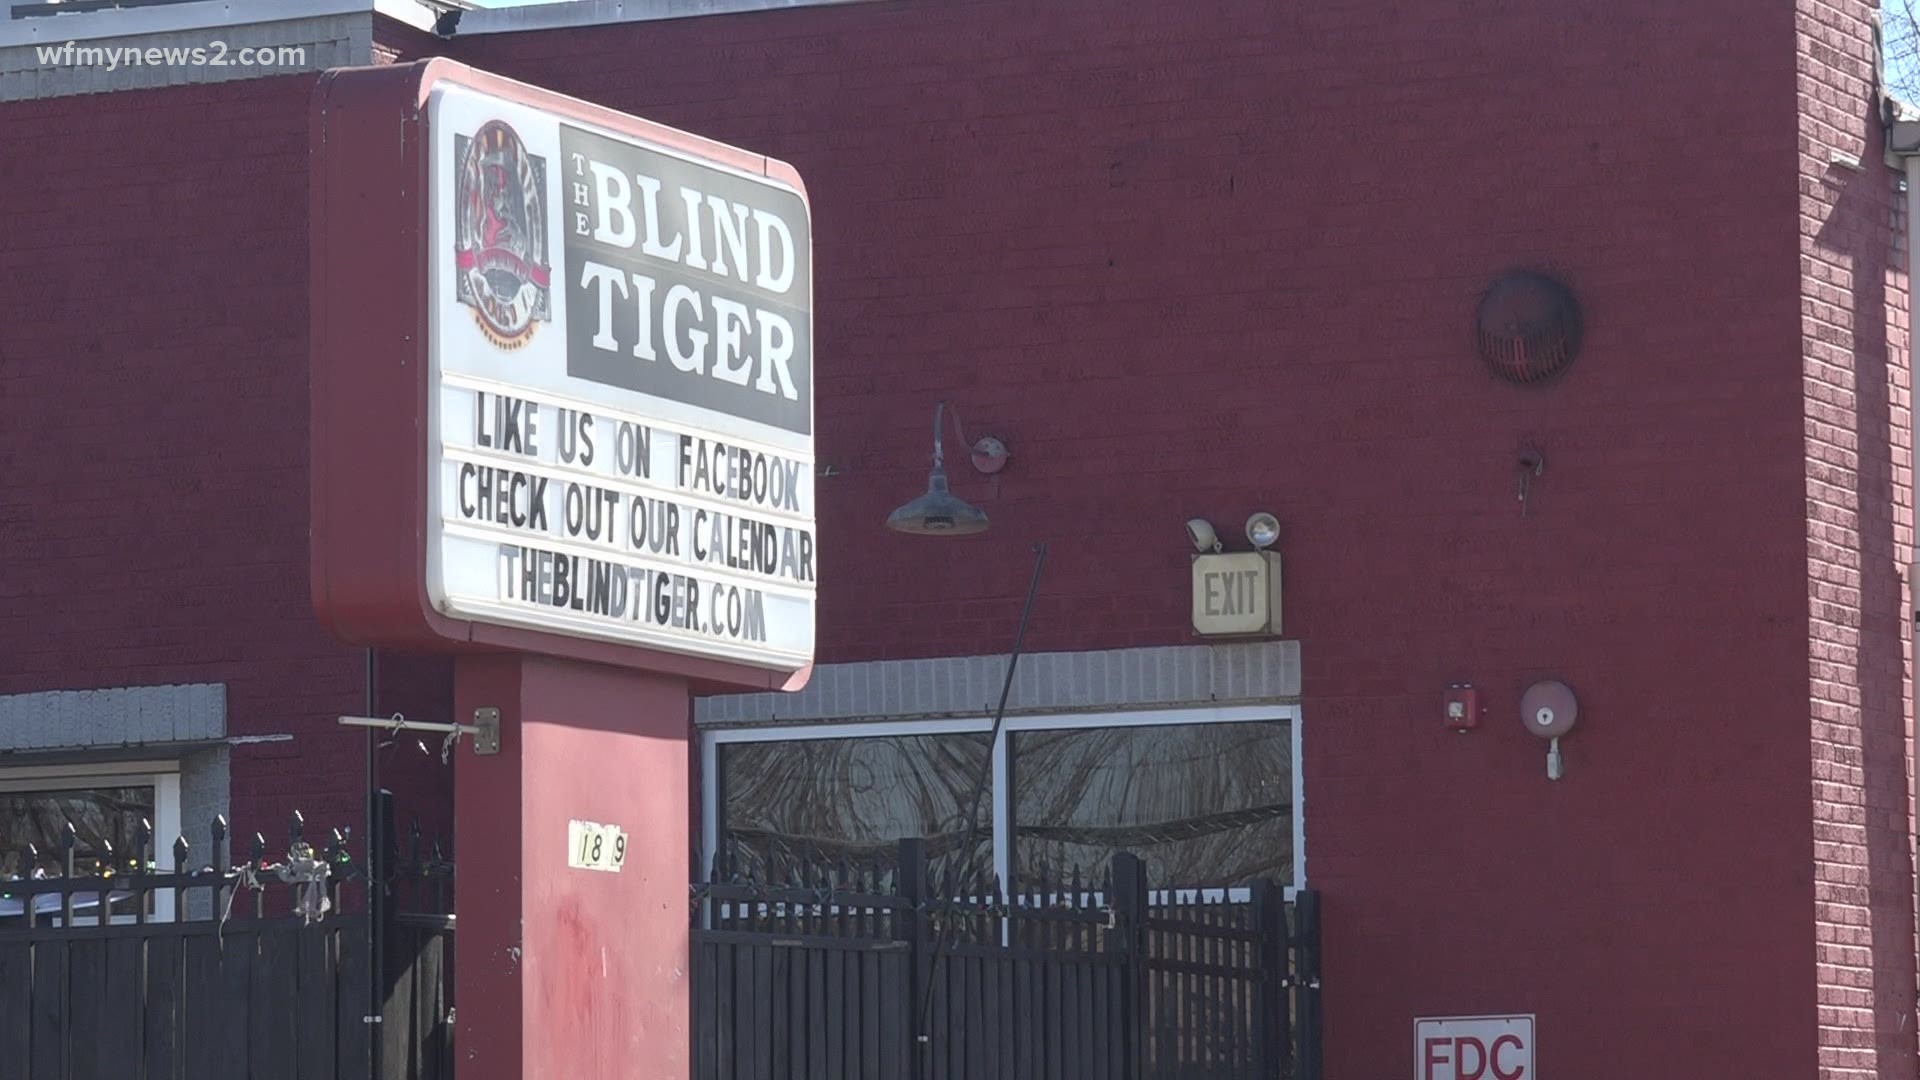 Complaints about a nearly maskless benefit concert at Greensboro's Blind Tiger sparked an investigation through the health department.